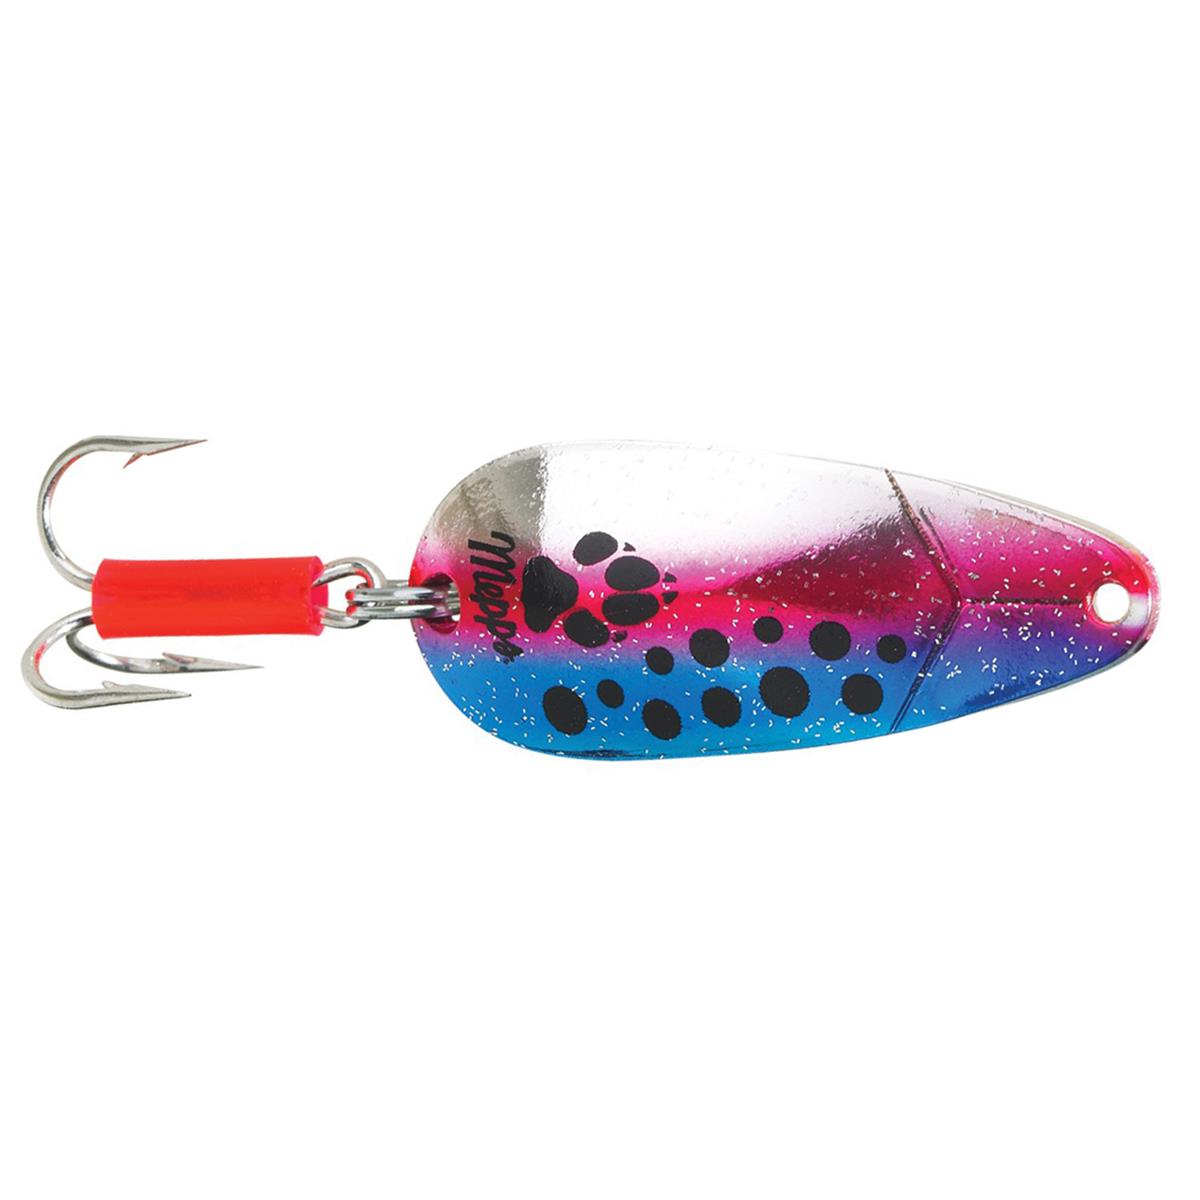 Mepps Brown Fishing Lures